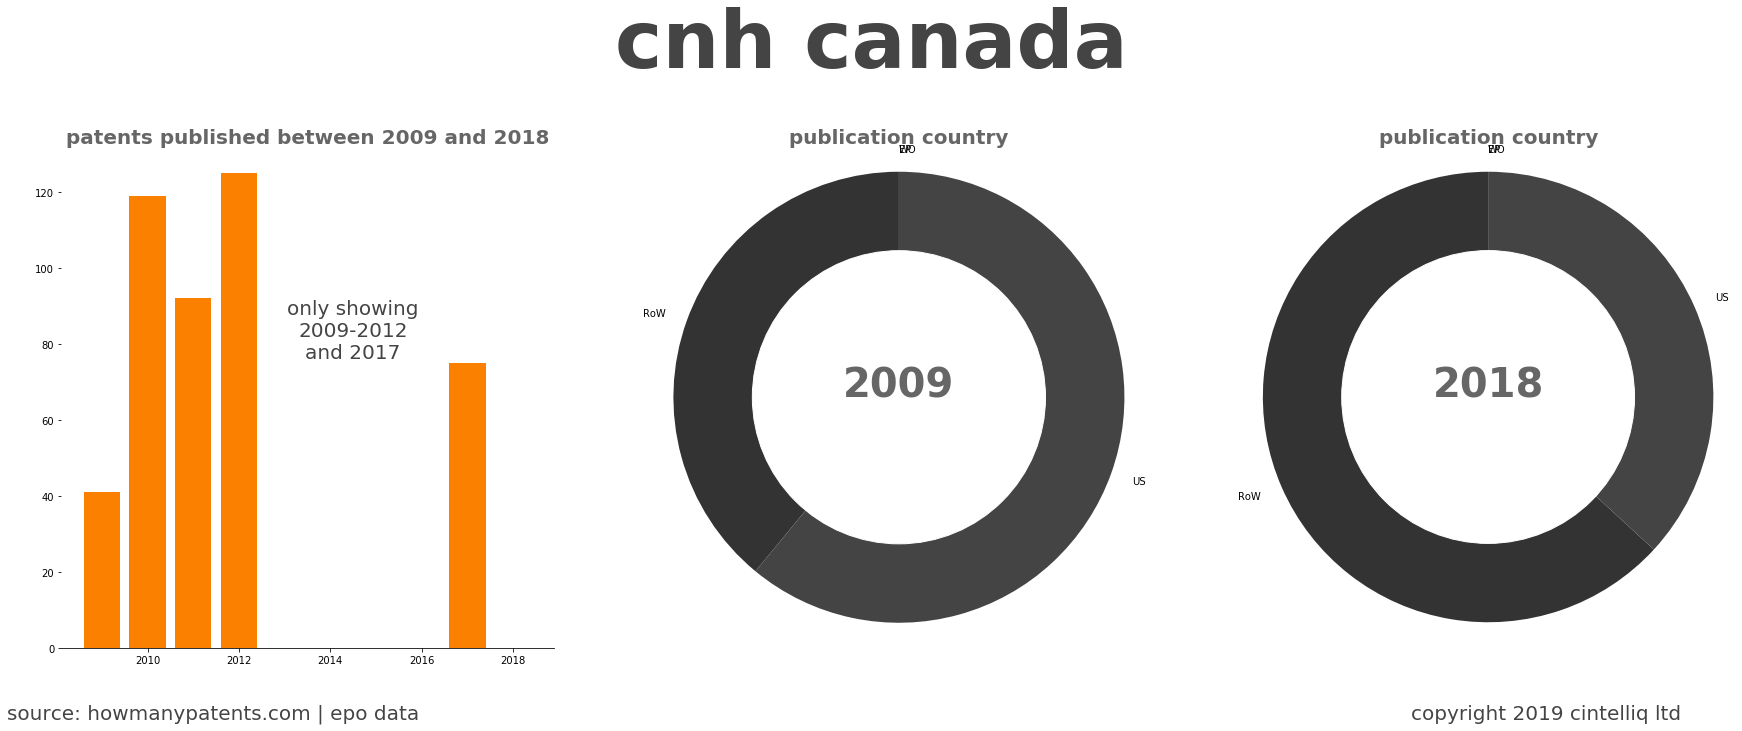 summary of patents for Cnh Canada